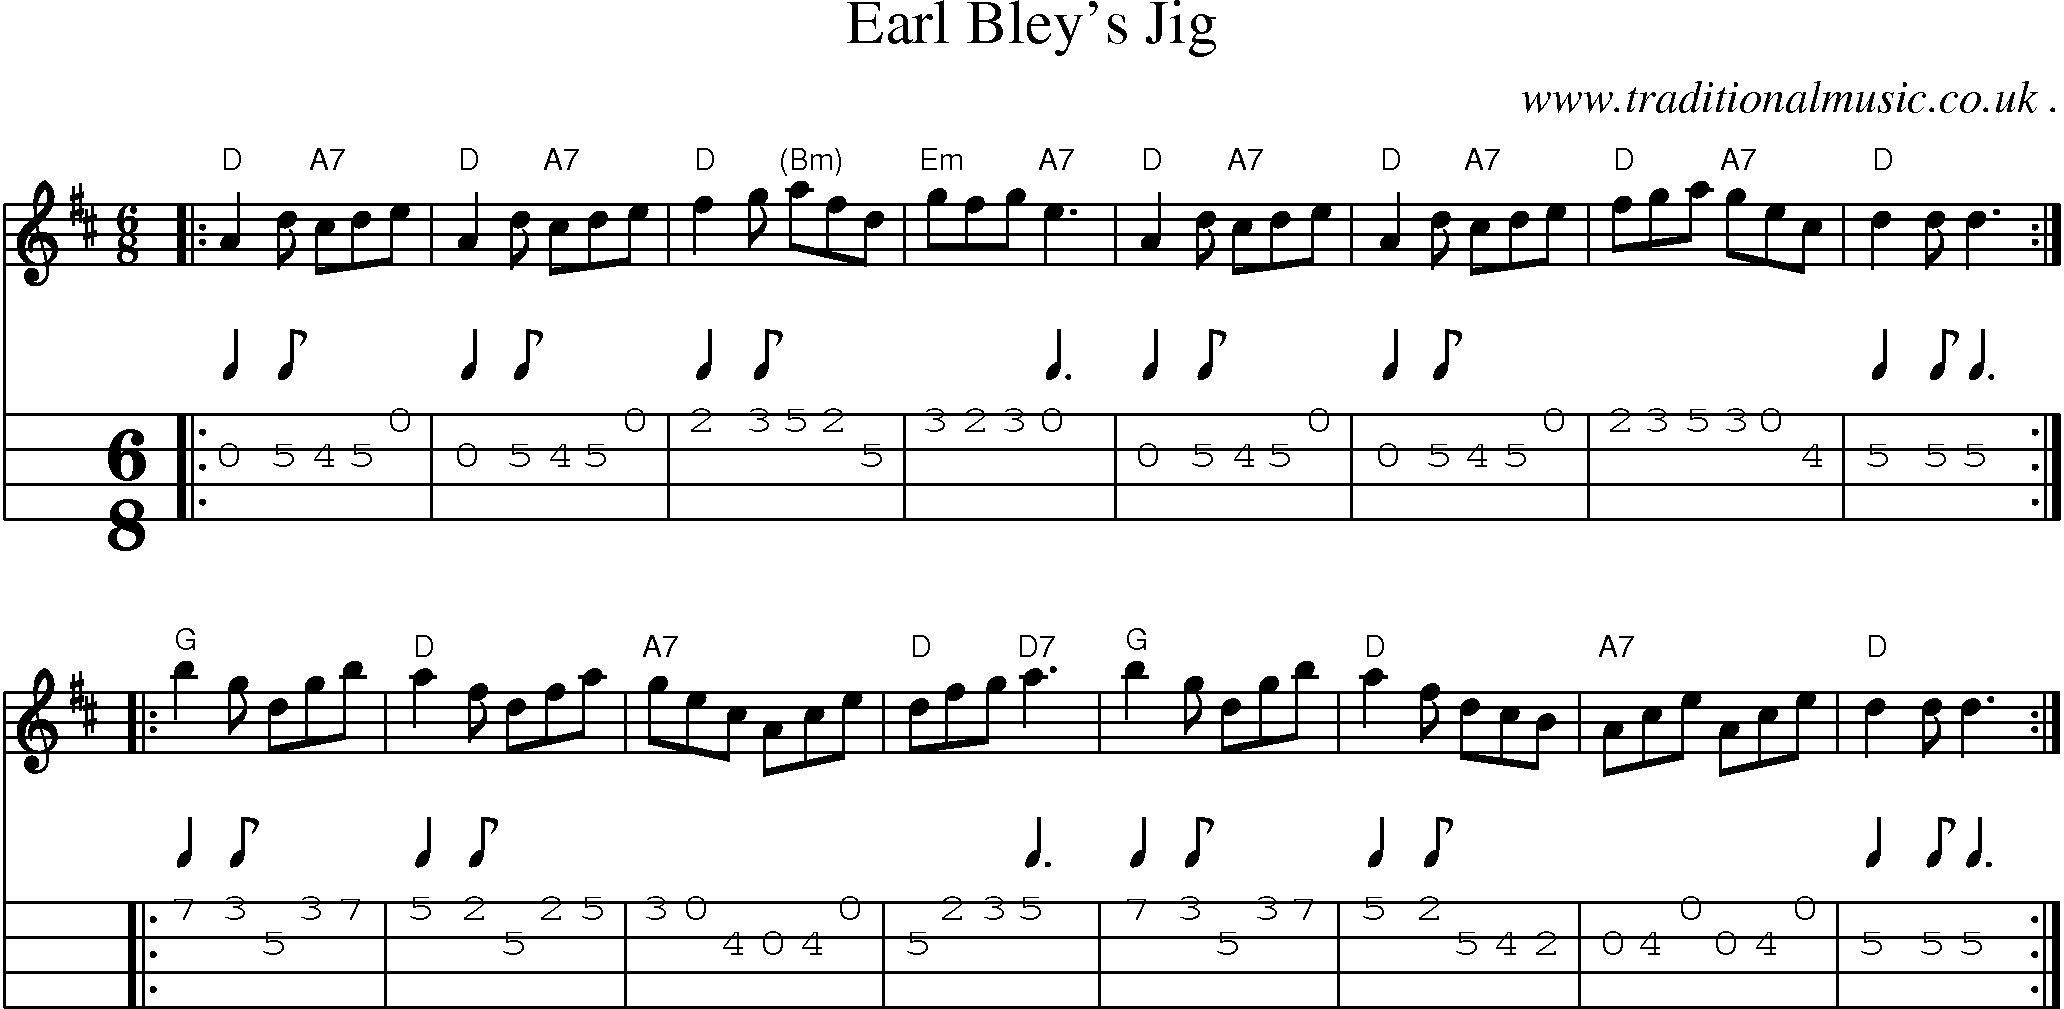 Sheet-music  score, Chords and Mandolin Tabs for Earl Bleys Jig